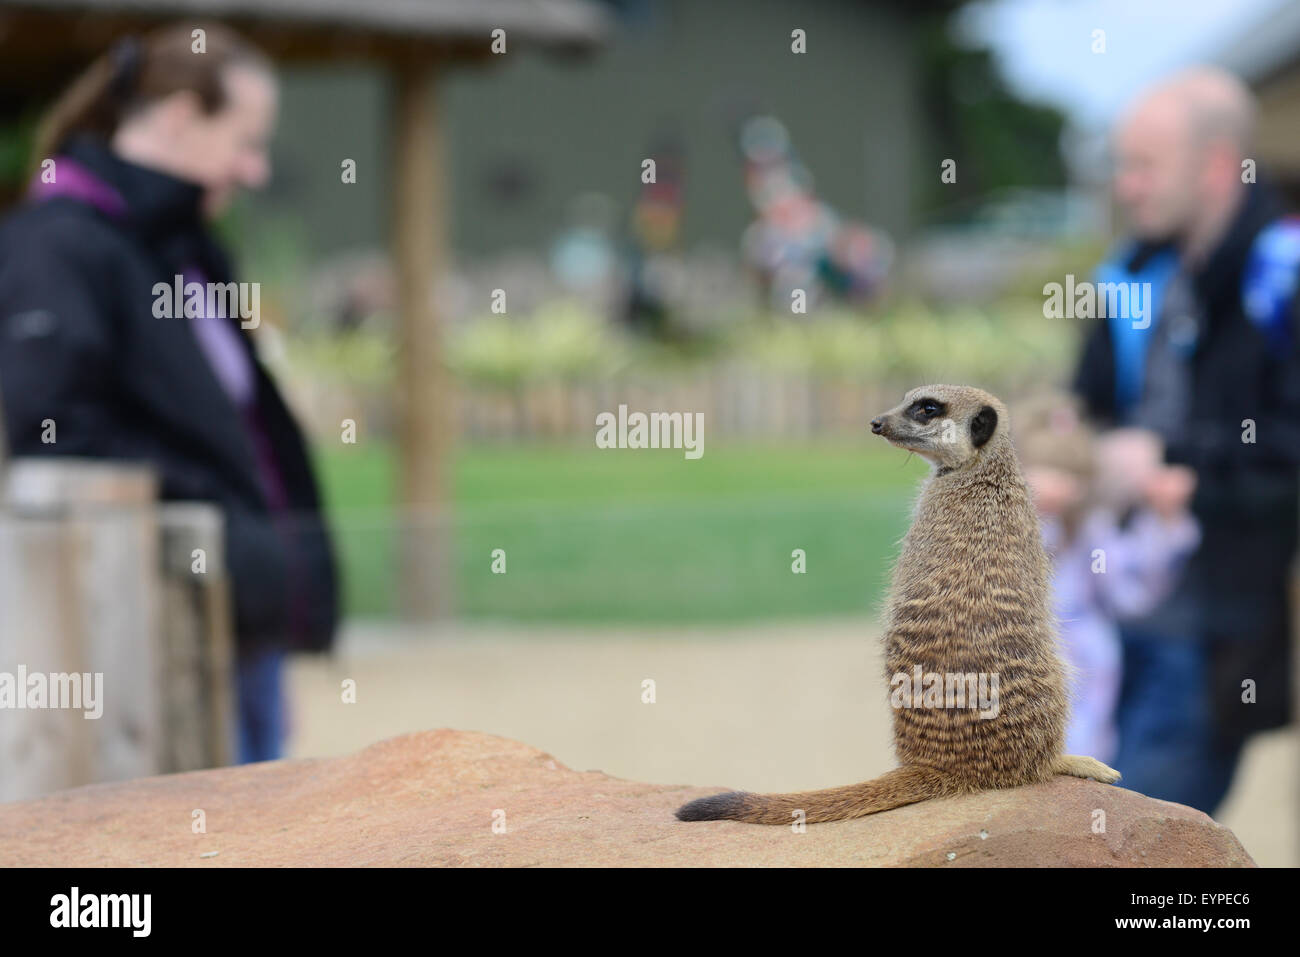 Meerkat at Yorkshire Wildlife Park, Doncaster, South Yorkshire, UK. Picture: Scott Bairstow/Alamy Stock Photo